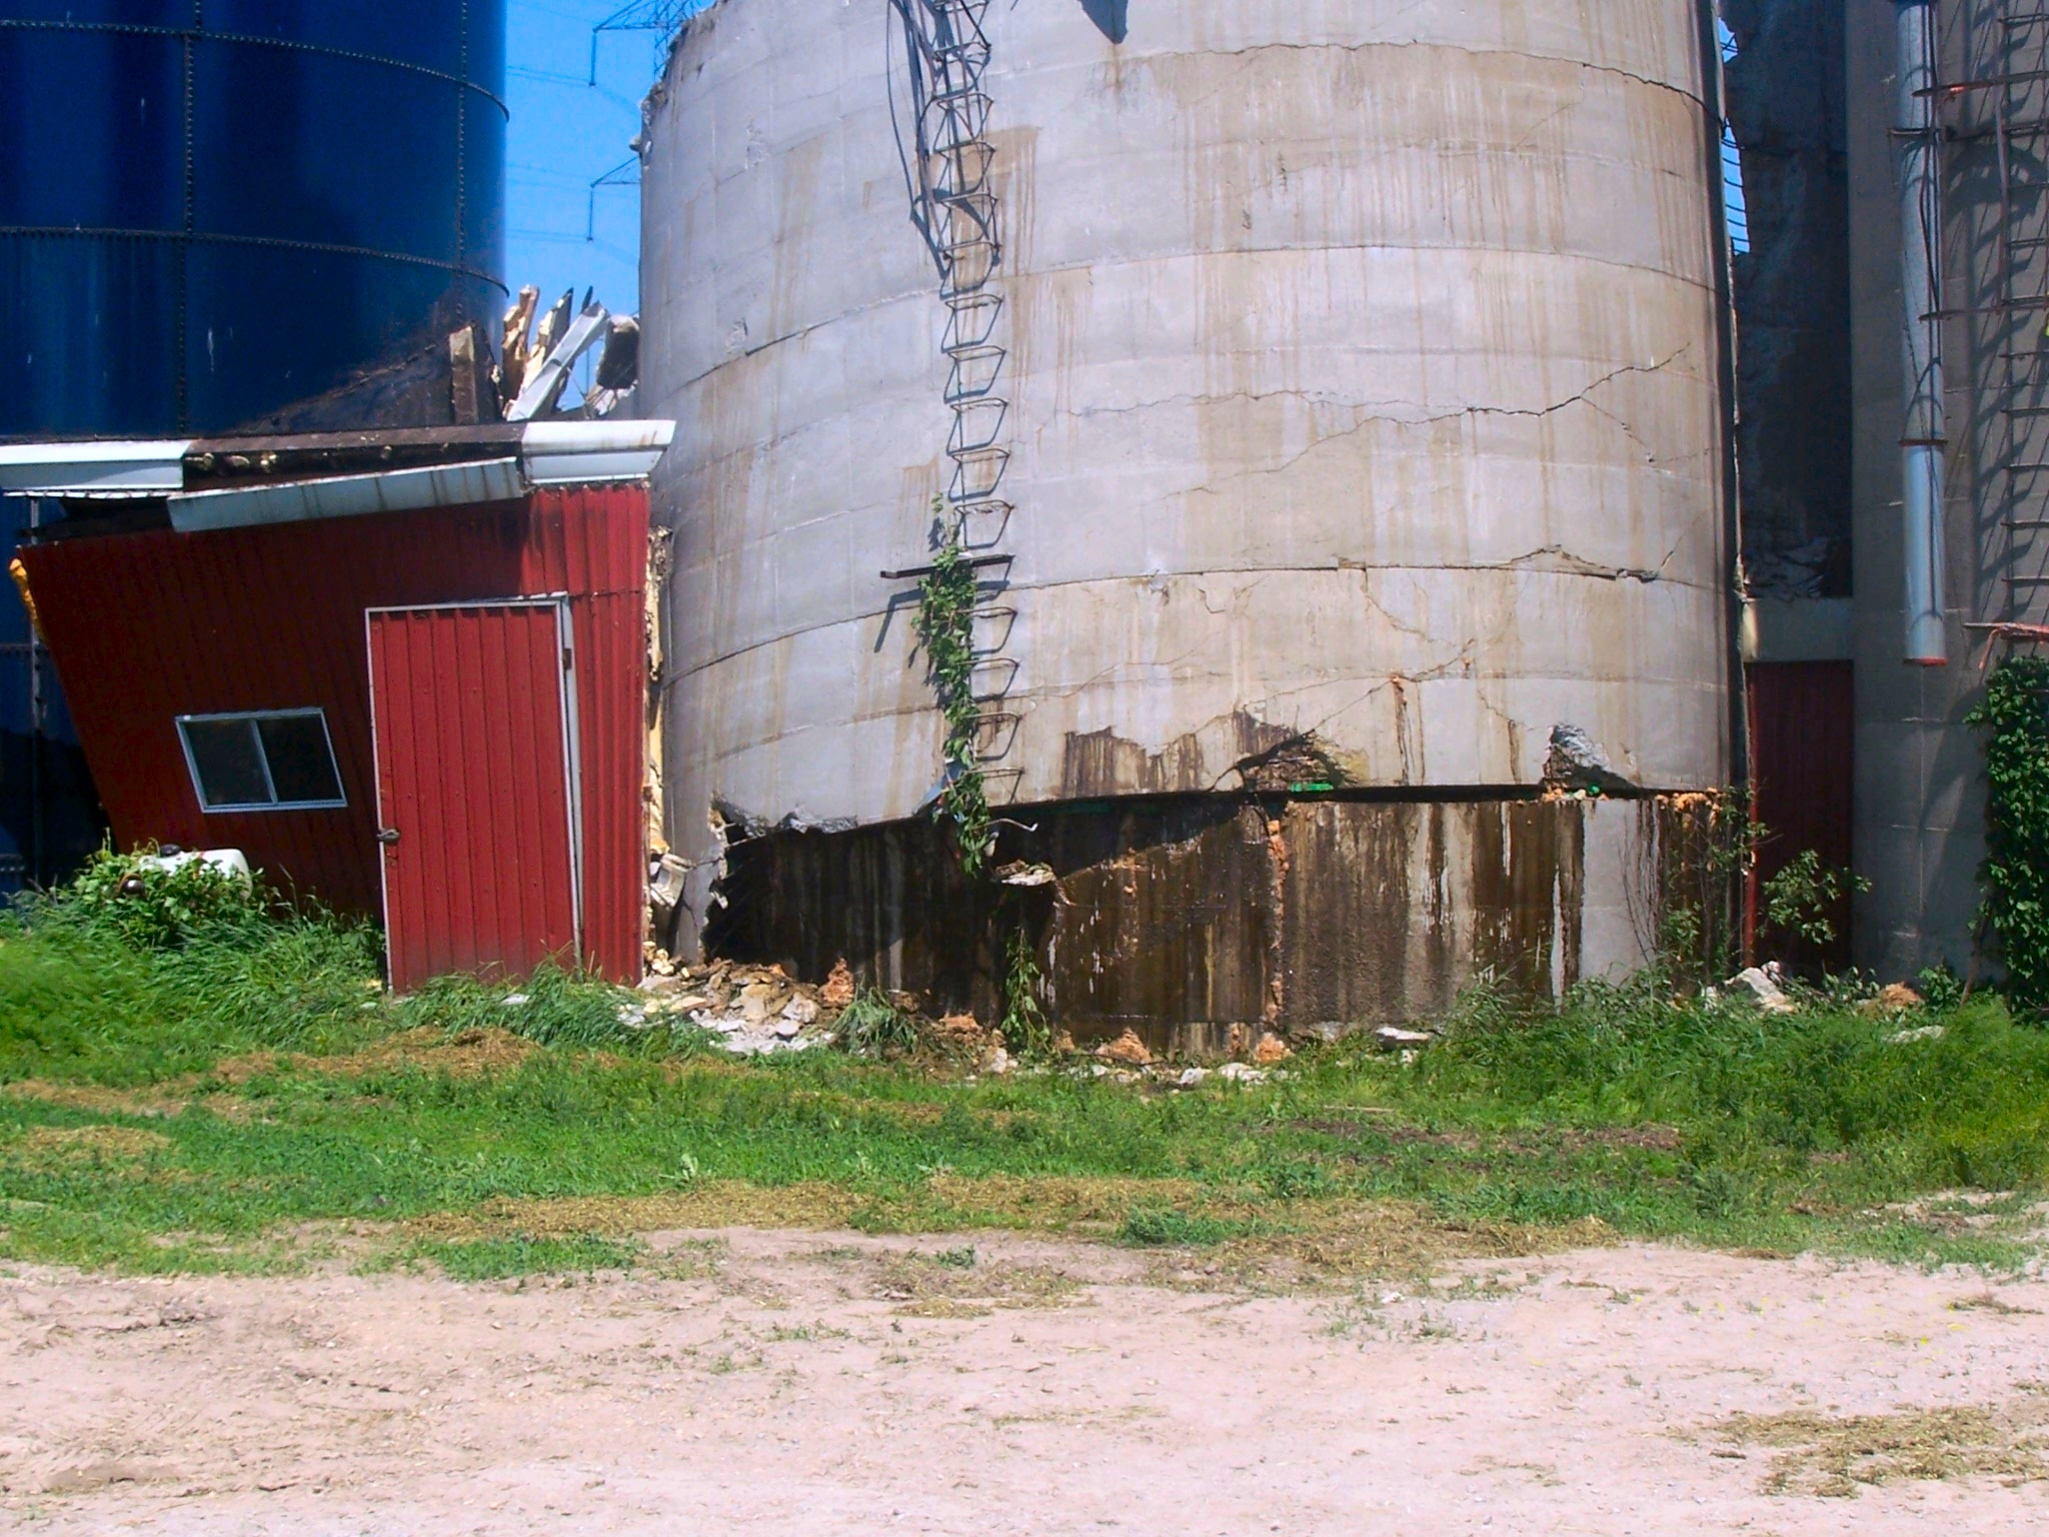 Seepage that can occur when a silo is filled with material that has a higher than normal moisture content; this corrosive liquid can damage the concrete and the reinforcing steel